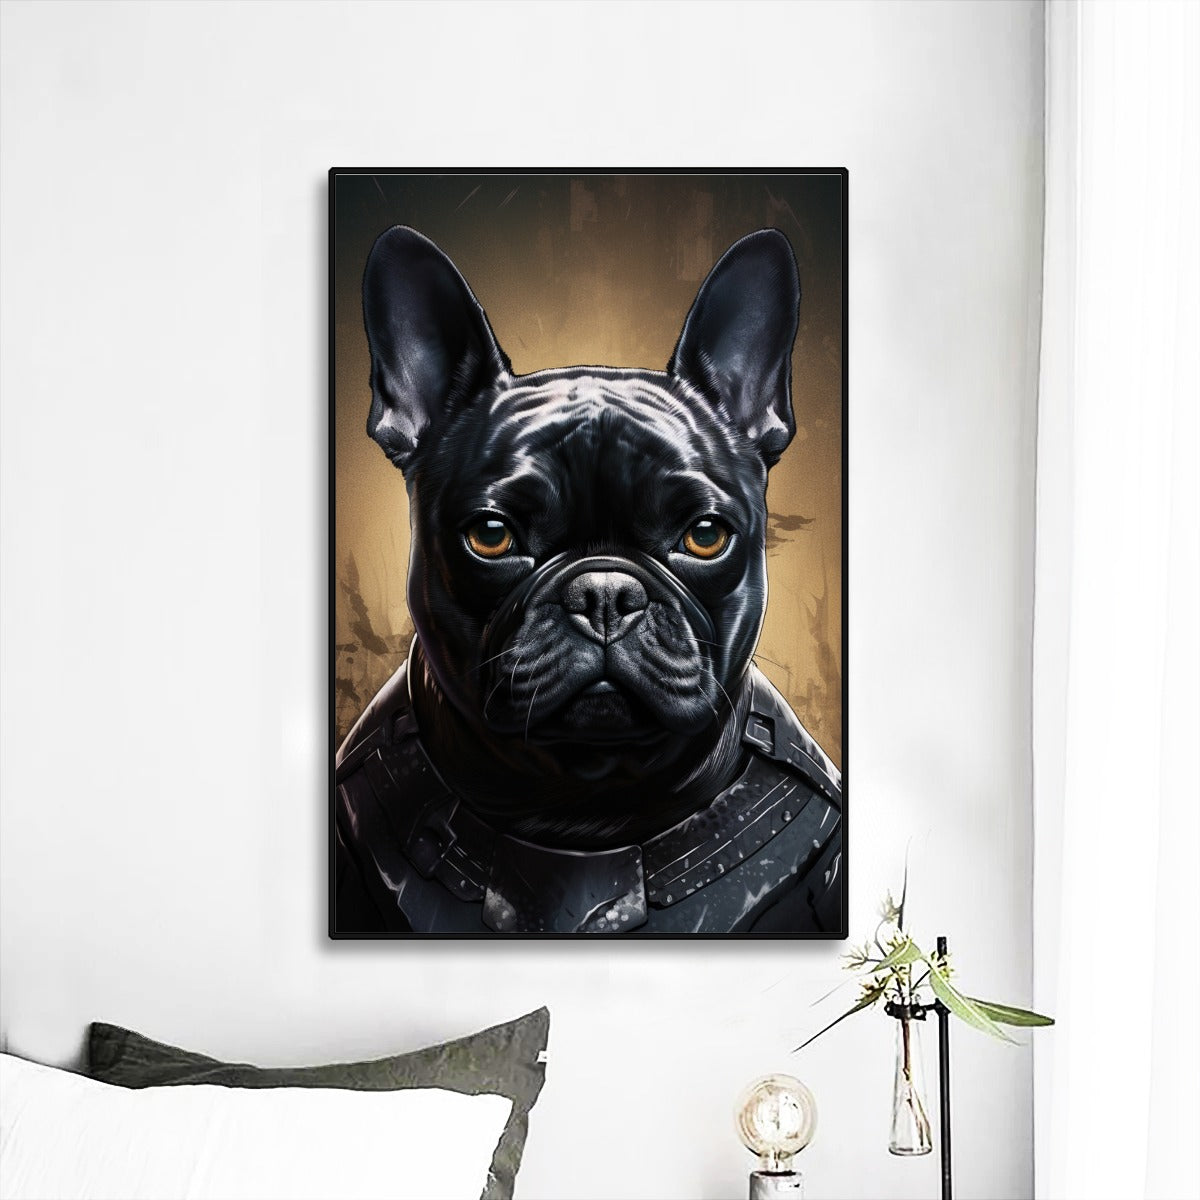 Delightful Frenchie-Inspired Wall Mural